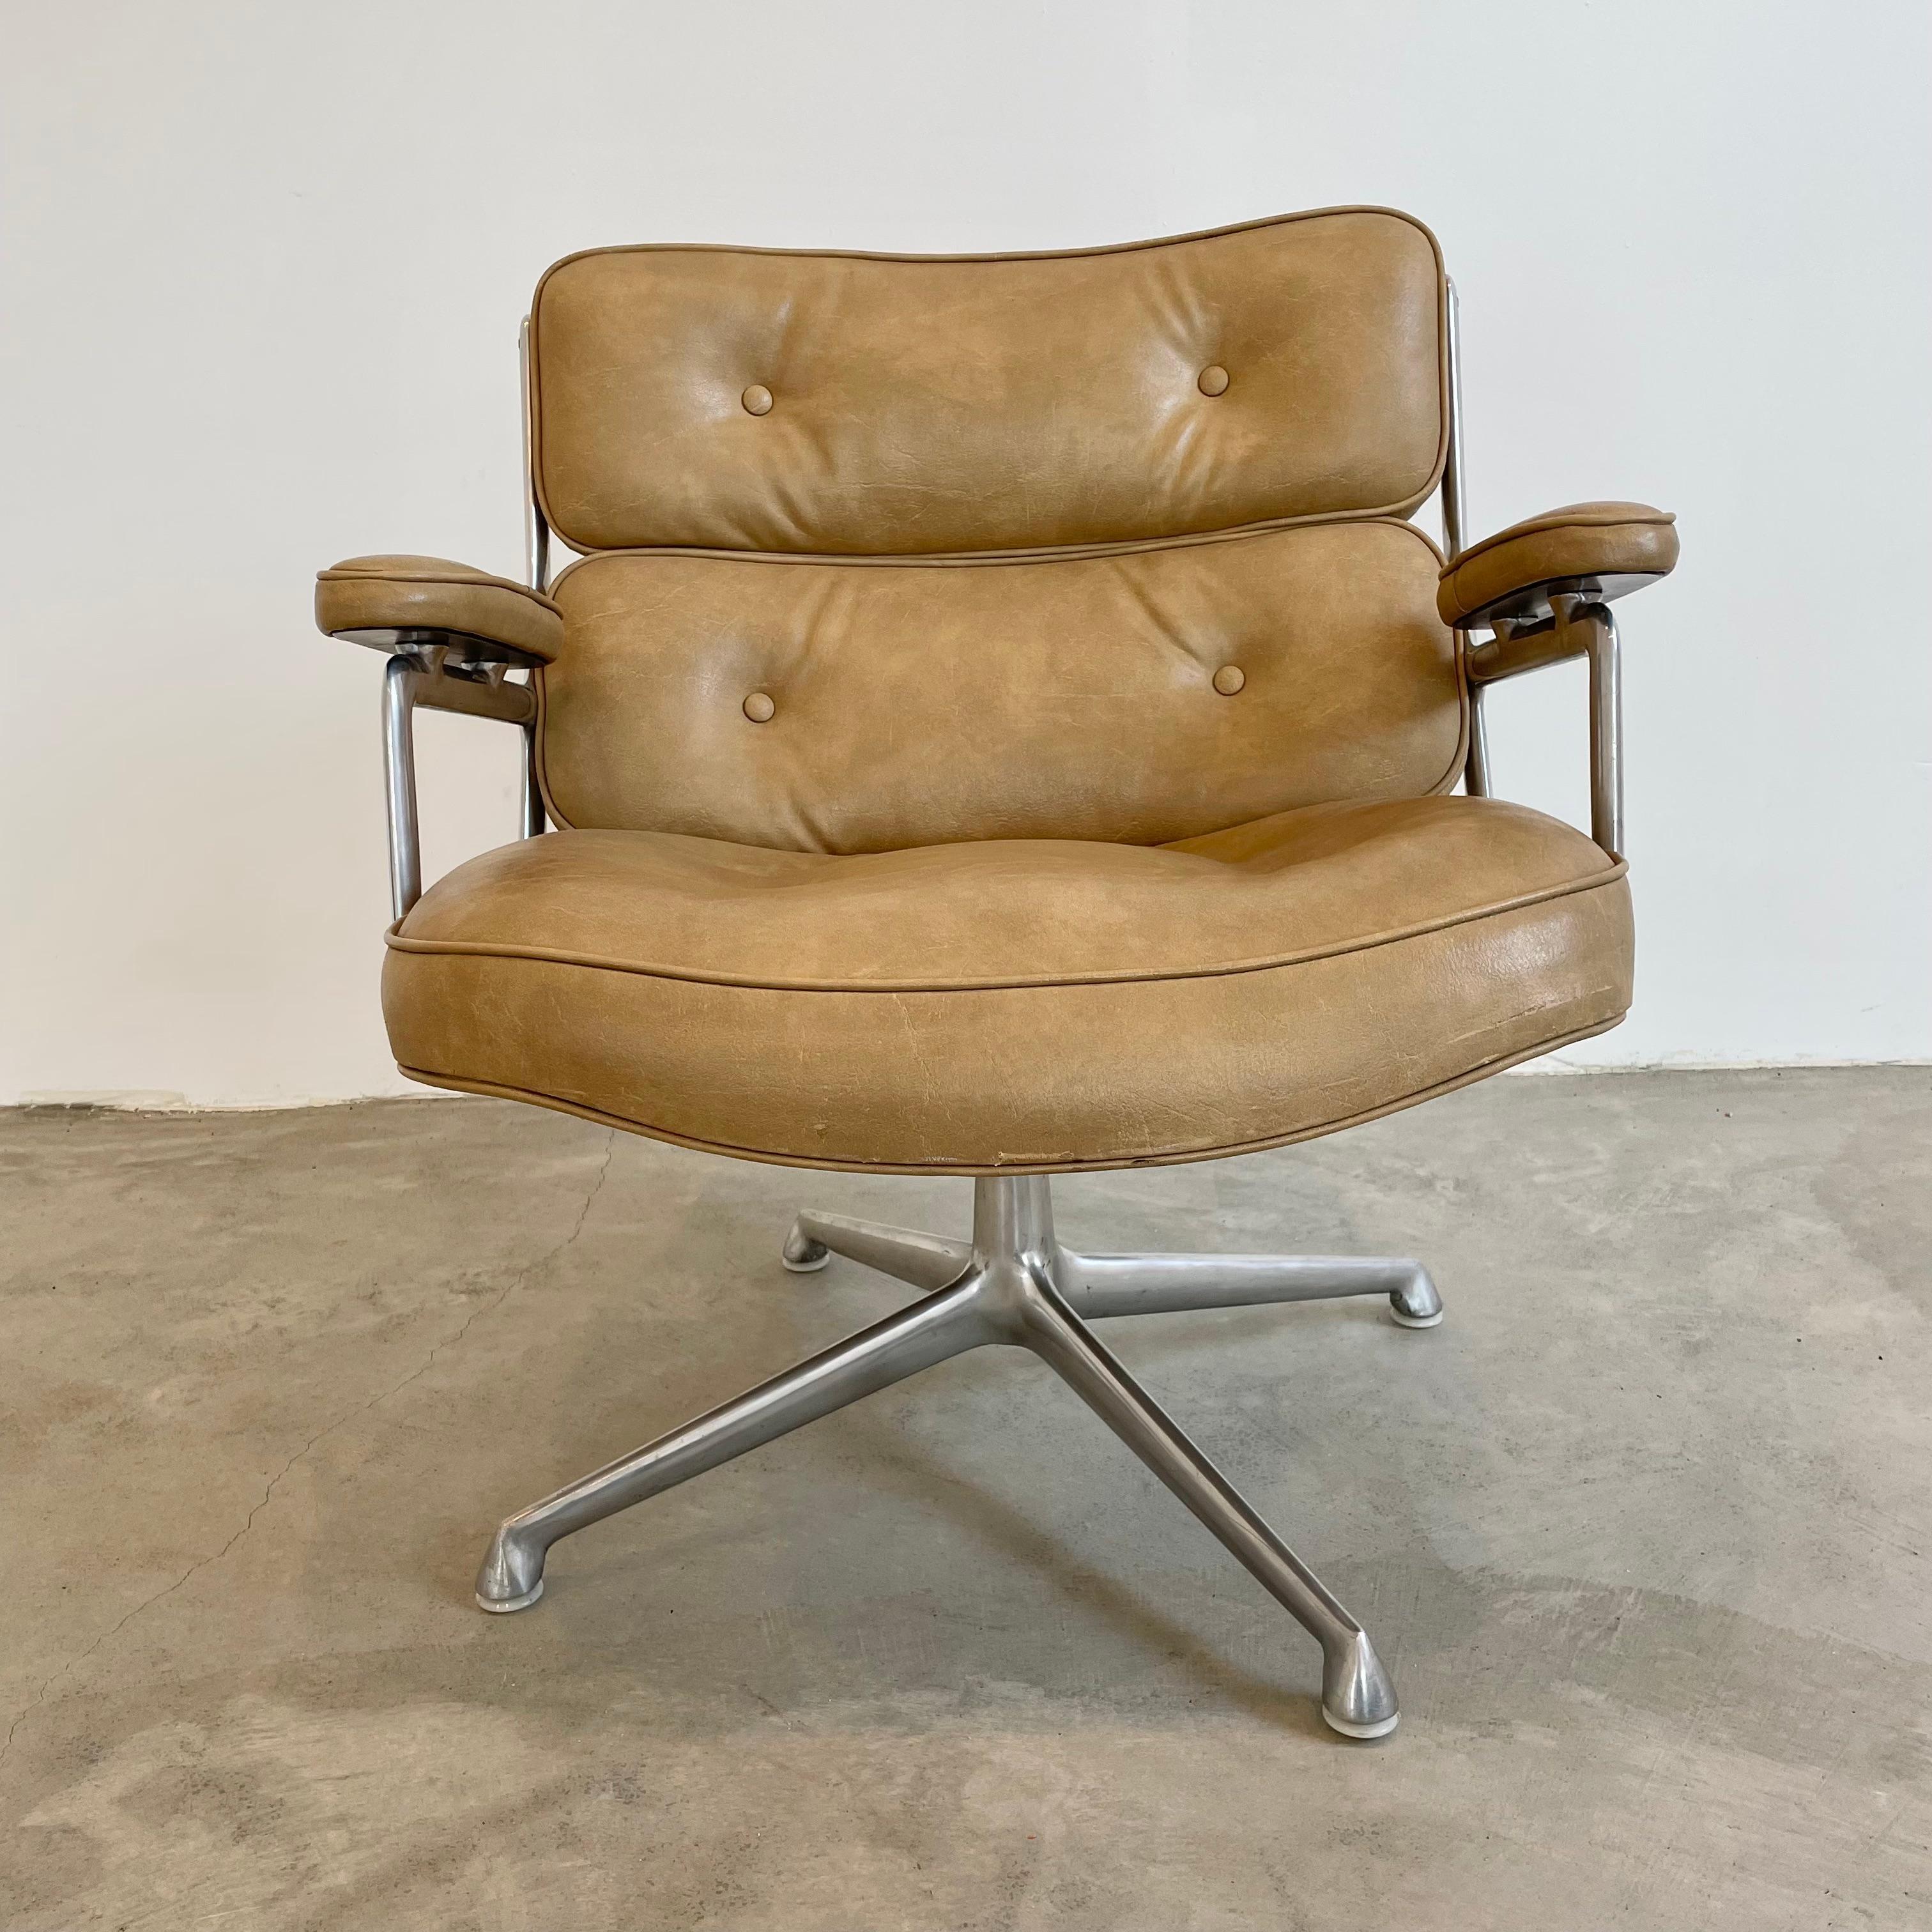 Vintage Eames Time Life Lobby Chair in Camel 3